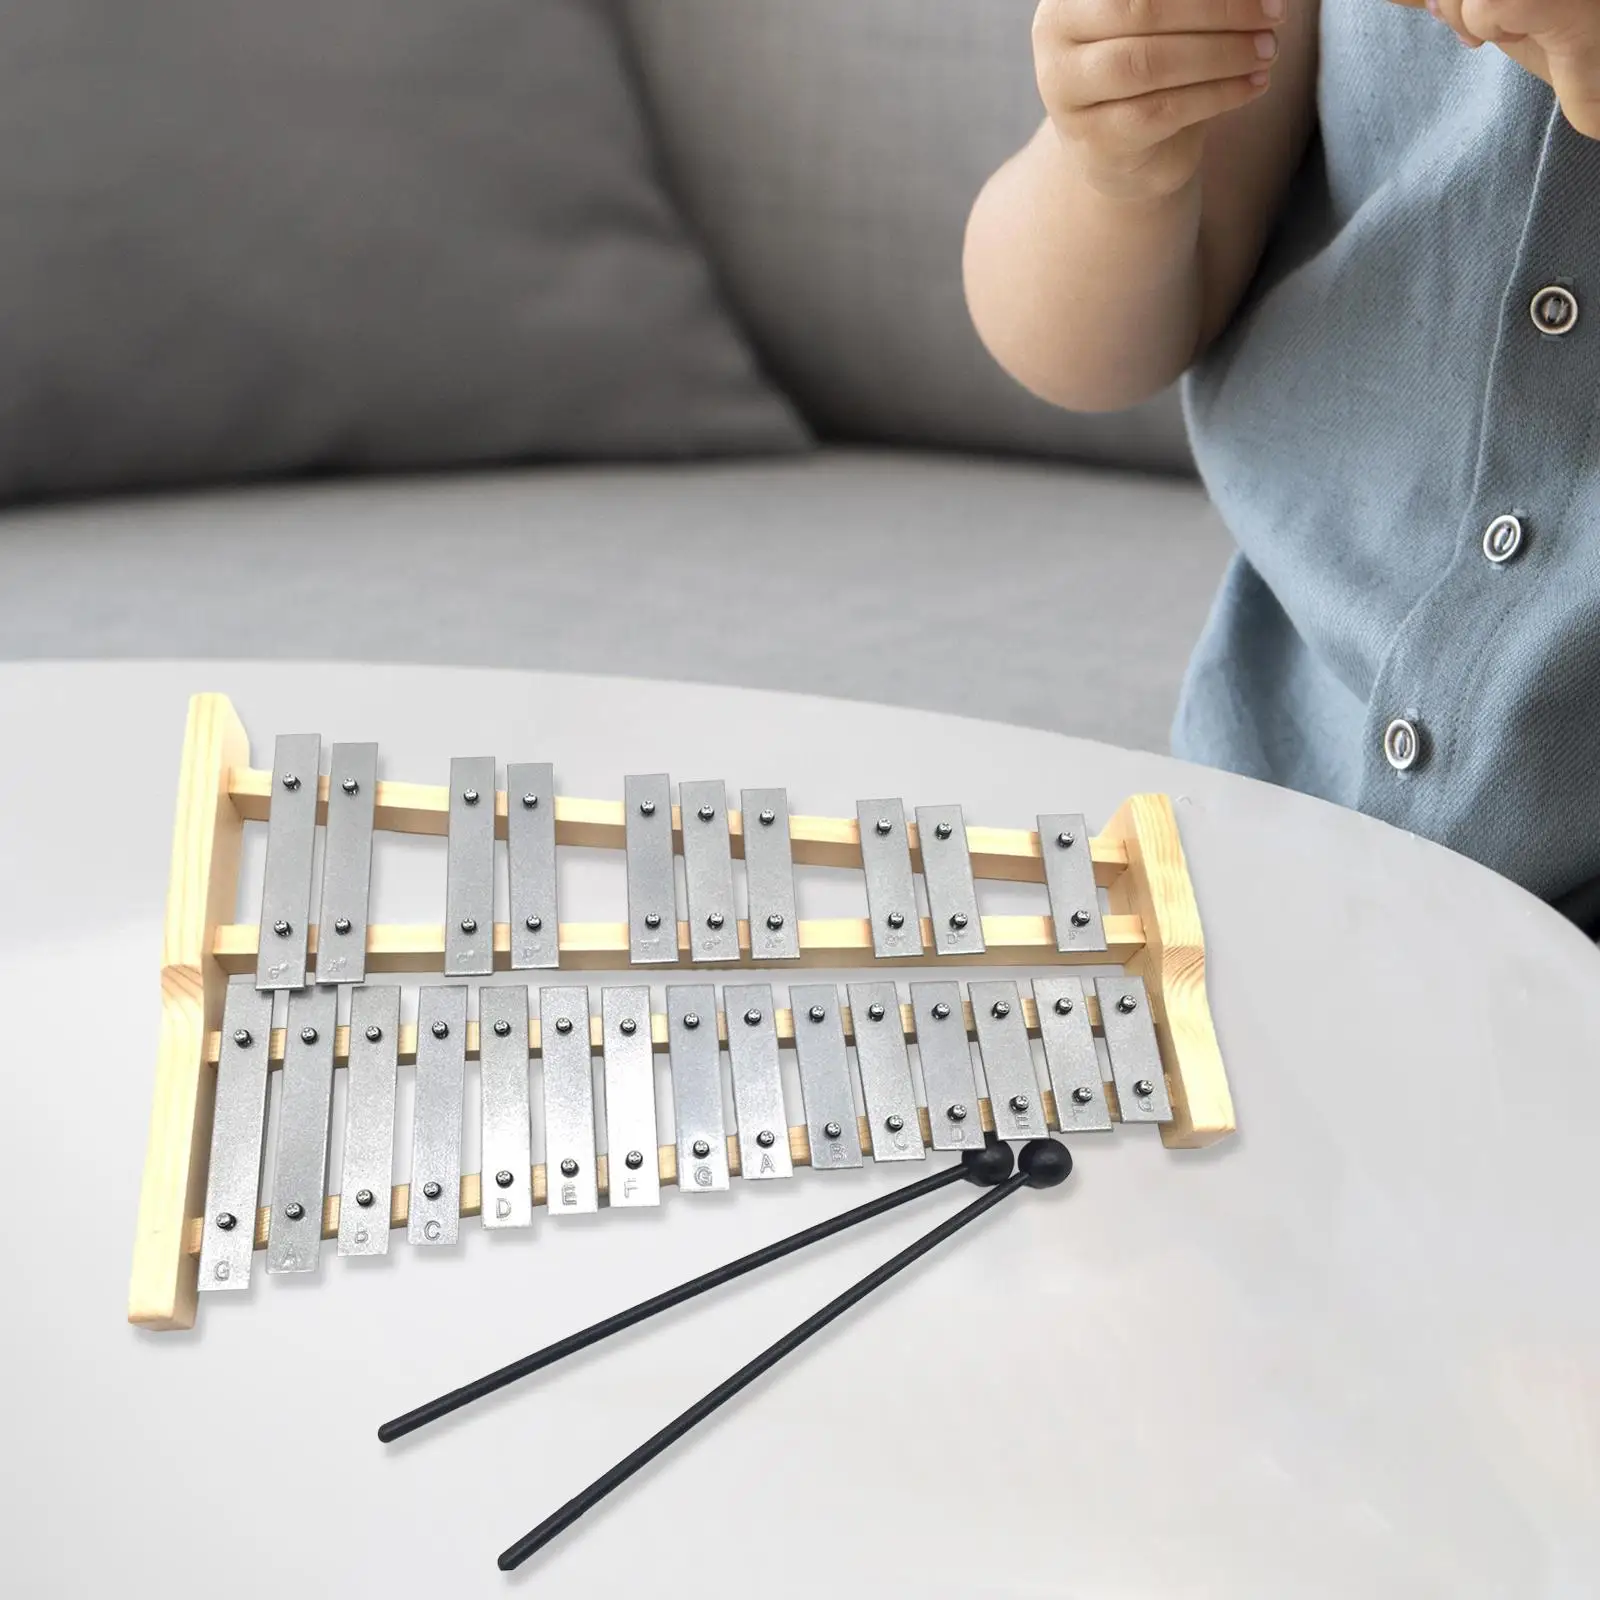 Xylophone Gifts for Kids Adults Professional 25 Key Glockenspiel Percussion Instrument Musical Educational Tuned Glockenspiel